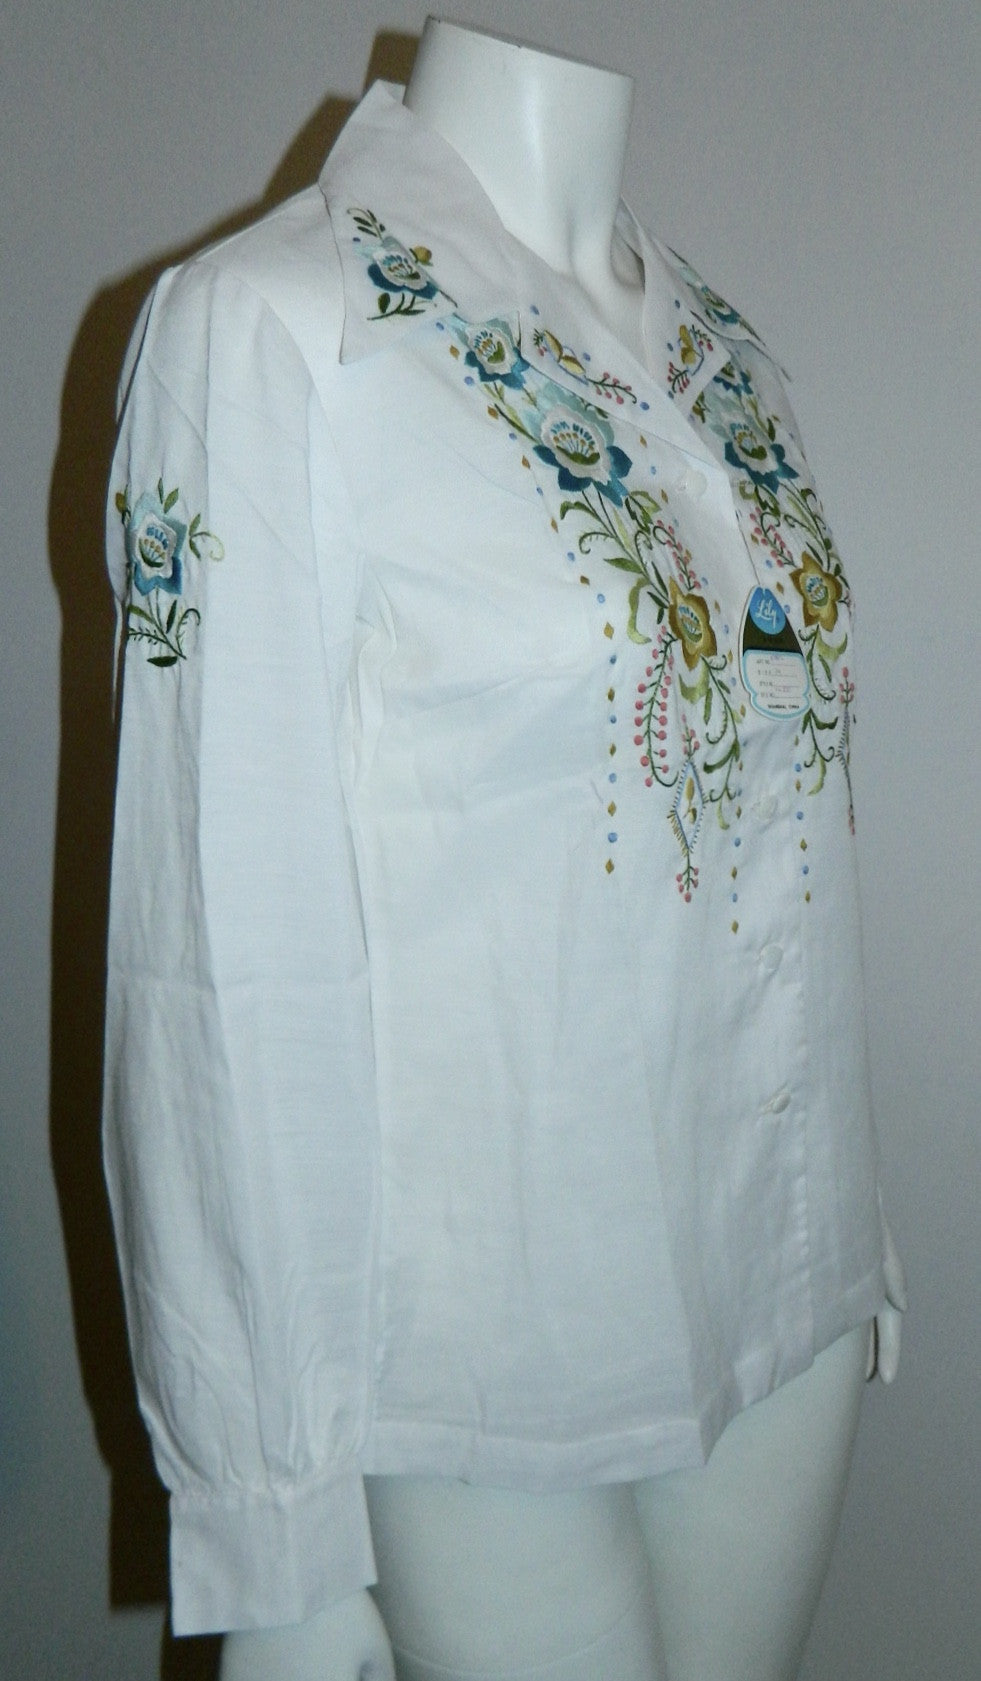 vintage white blouse 1970s hand embroidered flowers Lily XS / 34 NOS